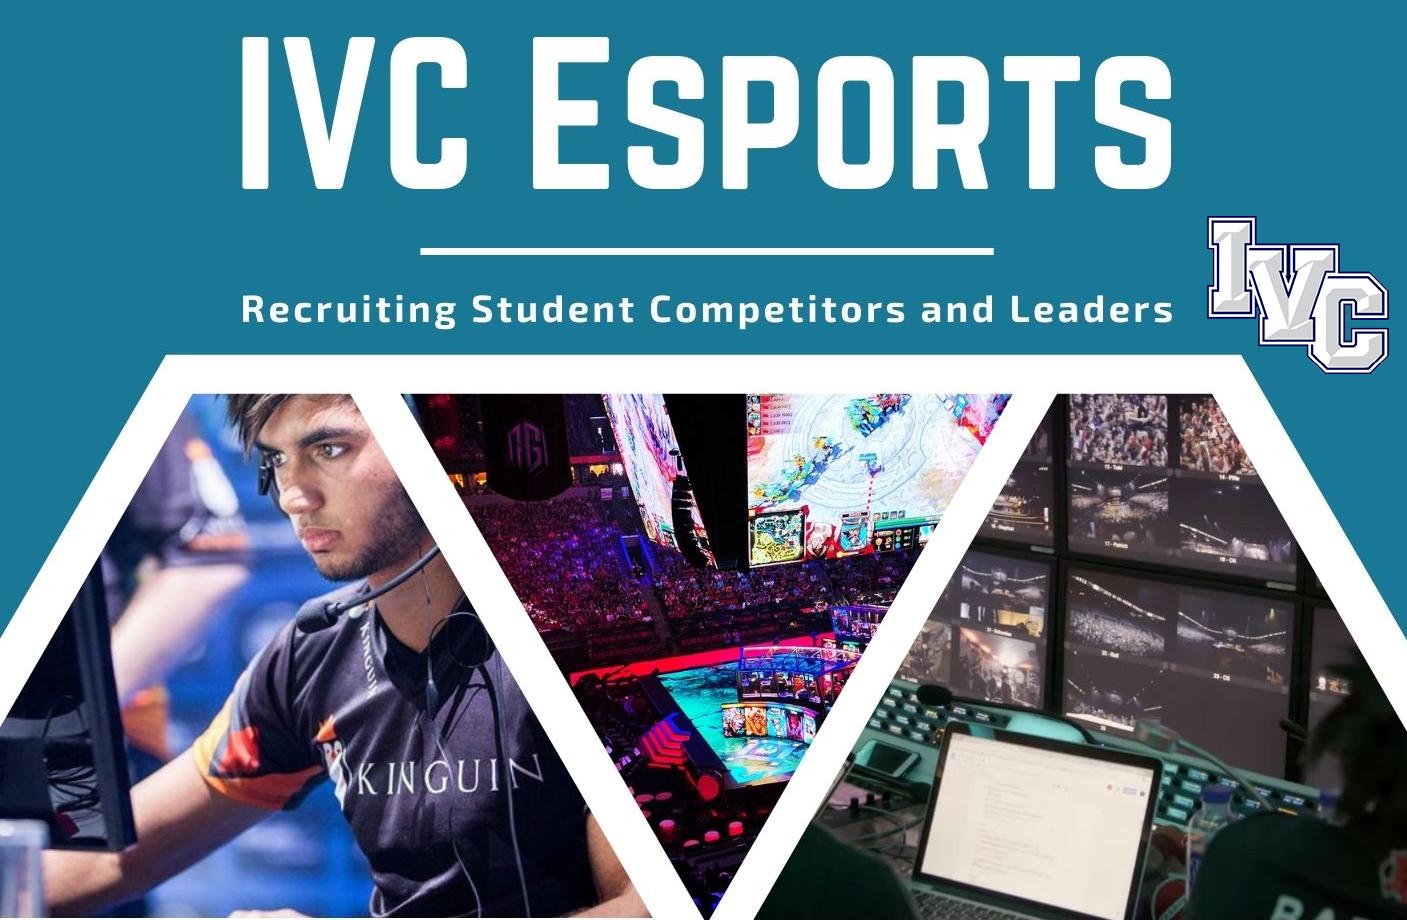 Irvine Valley esports gearing up for spring 2021 gaming